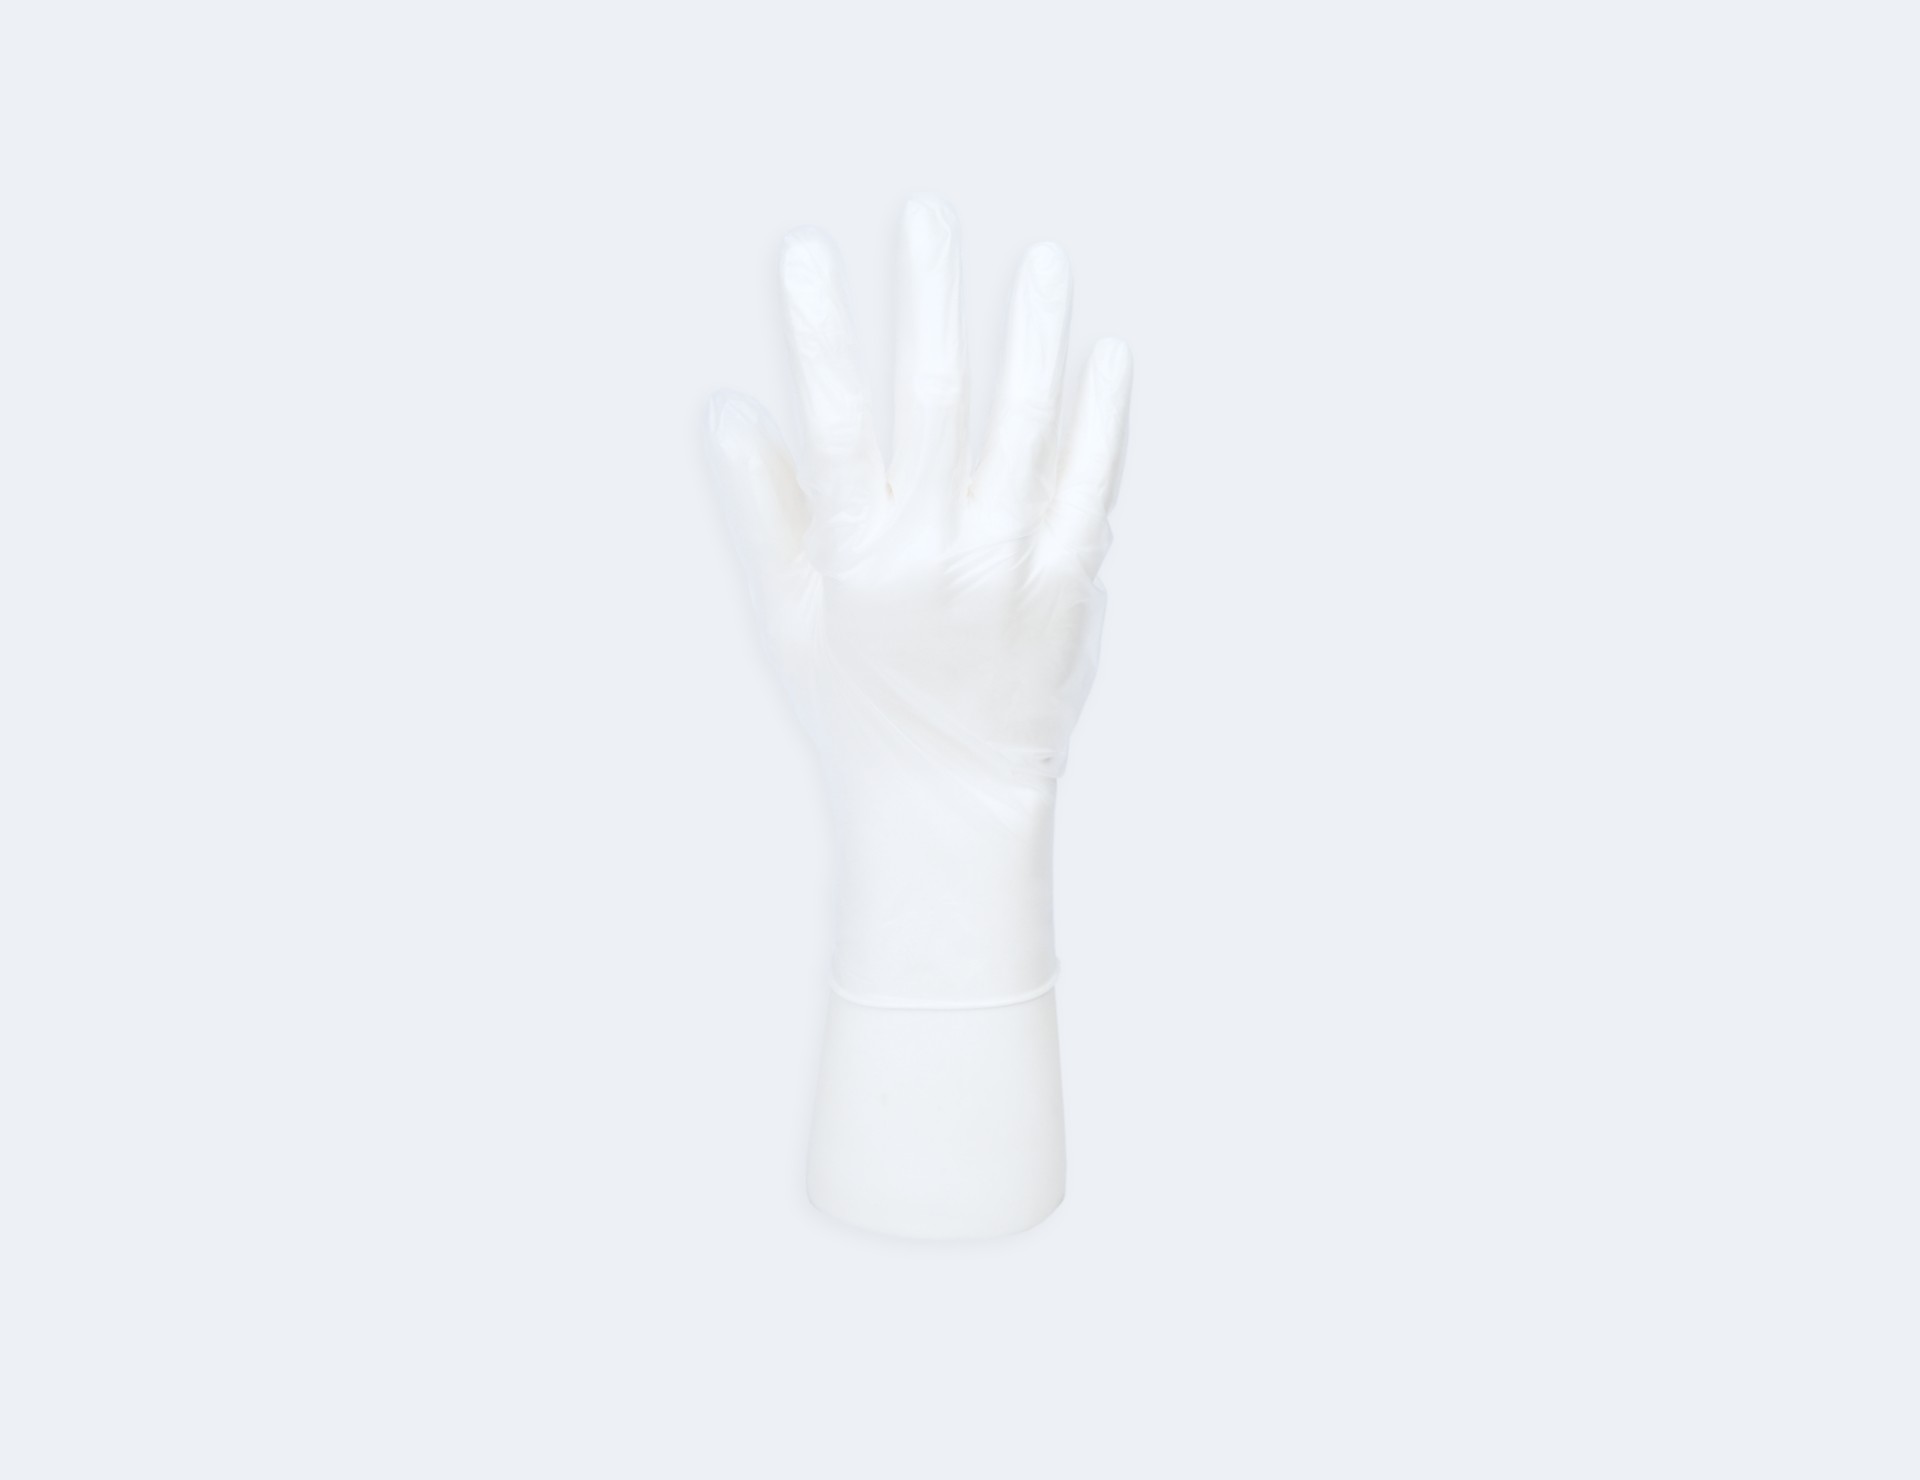 INTCO Medical Disposable LDPE/HDPE Gloves